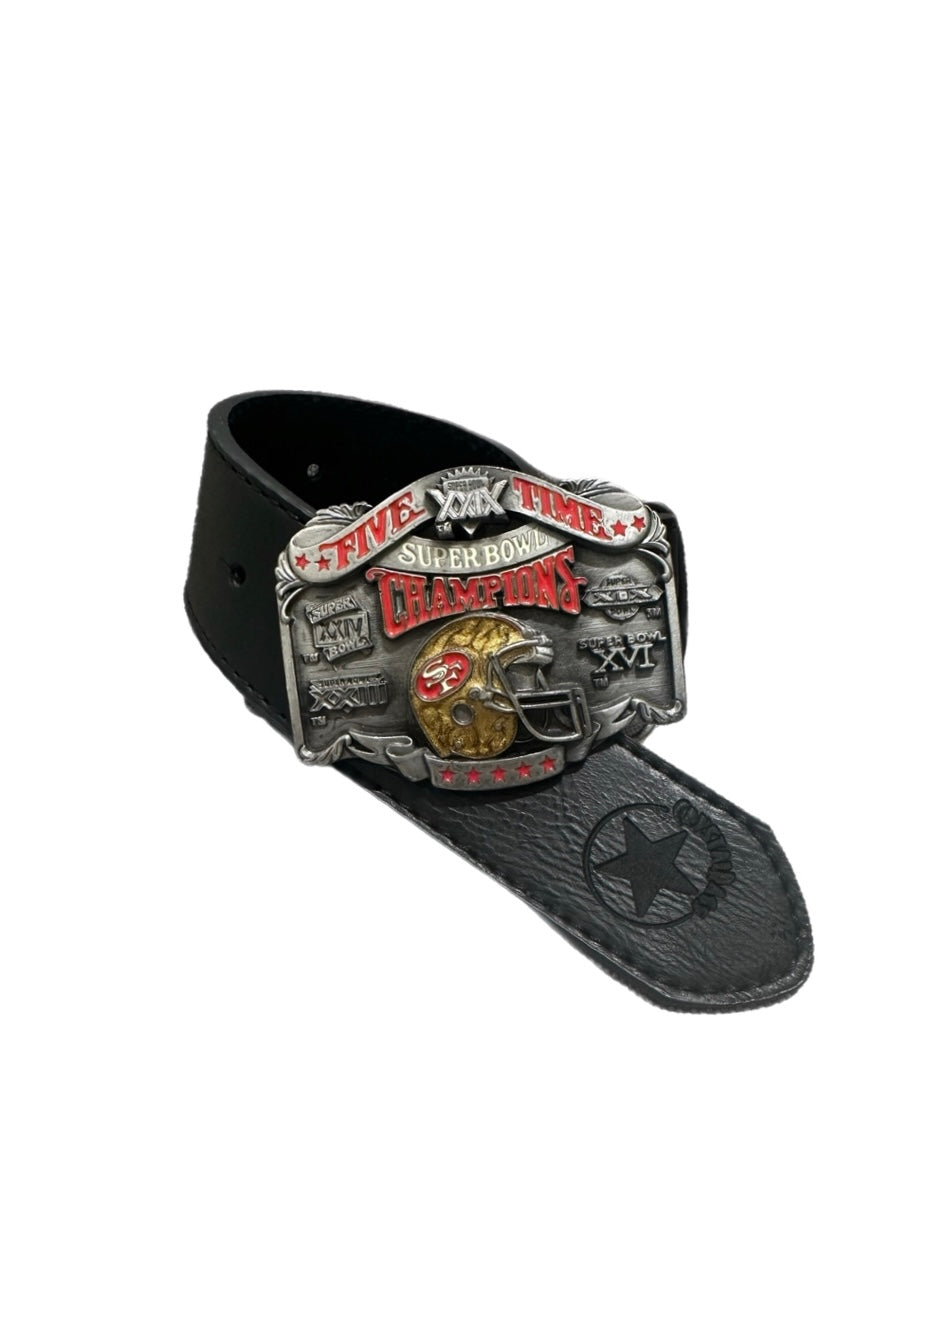 San Francisco 49ers, Football Vintage “Rare Find” Five Time Super Bowl Champions Belt Buckle with New Soft Leather Strap